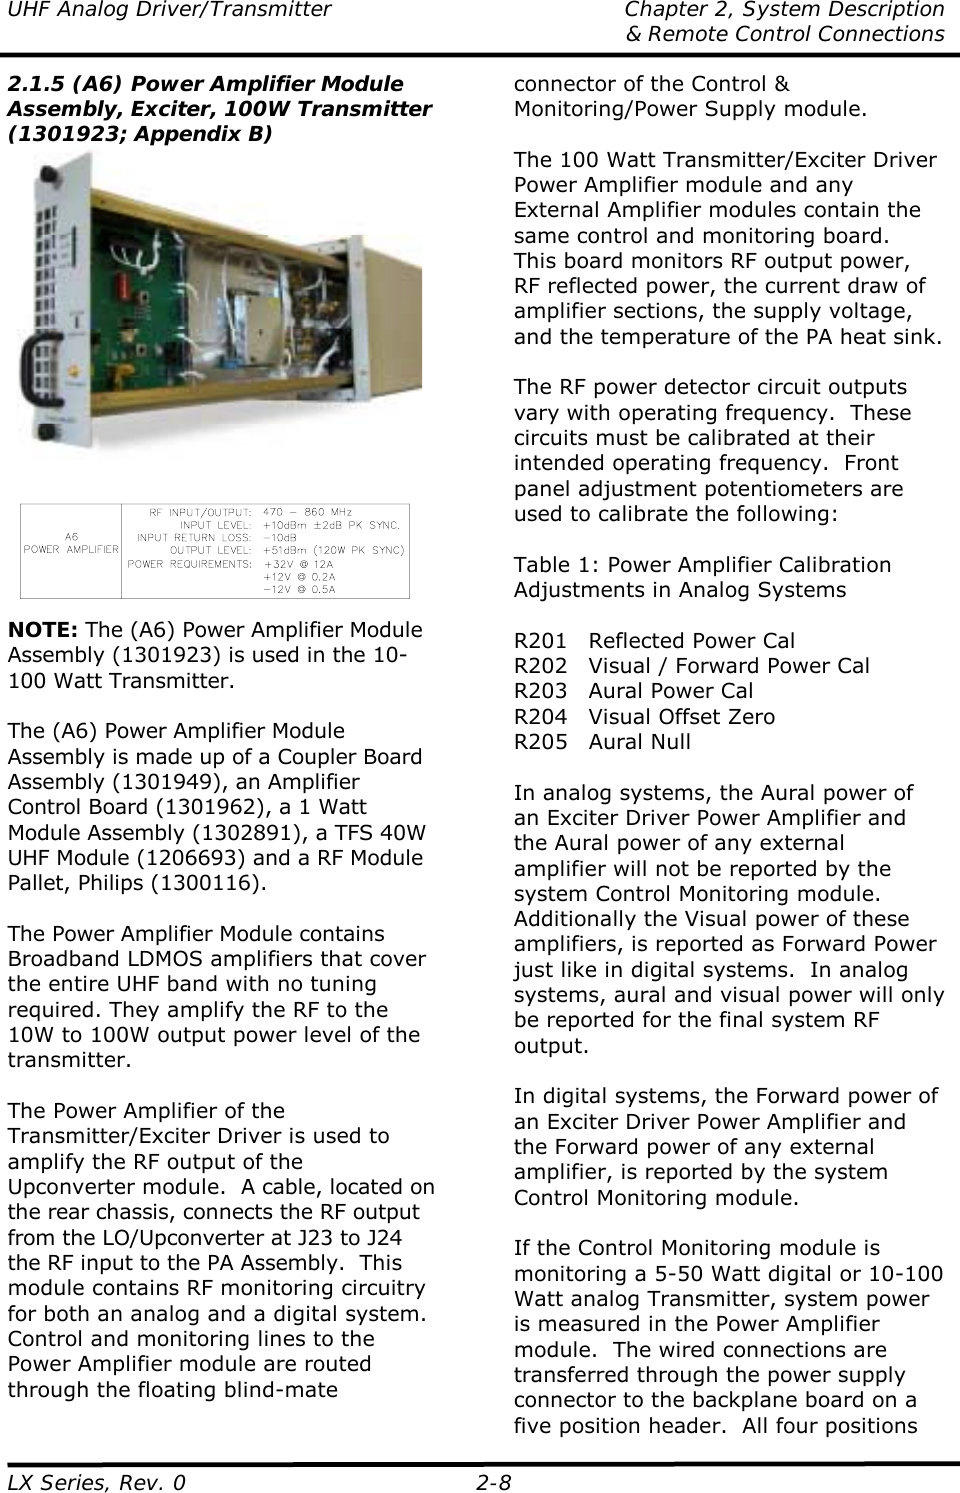 UHF Analog Driver/Transmitter  Chapter 2, System Description   &amp; Remote Control Connections LX Series, Rev. 0  2-8 2.1.5 (A6) Power Amplifier Module Assembly, Exciter, 100W Transmitter (1301923; Appendix B)   NOTE: The (A6) Power Amplifier Module Assembly (1301923) is used in the 10-100 Watt Transmitter.  The (A6) Power Amplifier Module Assembly is made up of a Coupler Board Assembly (1301949), an Amplifier Control Board (1301962), a 1 Watt Module Assembly (1302891), a TFS 40W UHF Module (1206693) and a RF Module Pallet, Philips (1300116).  The Power Amplifier Module contains Broadband LDMOS amplifiers that cover the entire UHF band with no tuning required. They amplify the RF to the 10W to 100W output power level of the transmitter.  The Power Amplifier of the Transmitter/Exciter Driver is used to amplify the RF output of the Upconverter module.  A cable, located on the rear chassis, connects the RF output from the LO/Upconverter at J23 to J24 the RF input to the PA Assembly.  This module contains RF monitoring circuitry for both an analog and a digital system.  Control and monitoring lines to the Power Amplifier module are routed through the floating blind-mate connector of the Control &amp; Monitoring/Power Supply module.  The 100 Watt Transmitter/Exciter Driver Power Amplifier module and any External Amplifier modules contain the same control and monitoring board.  This board monitors RF output power, RF reflected power, the current draw of amplifier sections, the supply voltage, and the temperature of the PA heat sink.  The RF power detector circuit outputs vary with operating frequency.  These circuits must be calibrated at their intended operating frequency.  Front panel adjustment potentiometers are used to calibrate the following:  Table 1: Power Amplifier Calibration Adjustments in Analog Systems  R201  Reflected Power Cal R202  Visual / Forward Power Cal R203  Aural Power Cal R204  Visual Offset Zero R205 Aural Null  In analog systems, the Aural power of an Exciter Driver Power Amplifier and the Aural power of any external amplifier will not be reported by the system Control Monitoring module.  Additionally the Visual power of these amplifiers, is reported as Forward Power just like in digital systems.  In analog systems, aural and visual power will only be reported for the final system RF output.    In digital systems, the Forward power of an Exciter Driver Power Amplifier and the Forward power of any external amplifier, is reported by the system Control Monitoring module.   If the Control Monitoring module is monitoring a 5-50 Watt digital or 10-100 Watt analog Transmitter, system power is measured in the Power Amplifier module.  The wired connections are transferred through the power supply connector to the backplane board on a five position header.  All four positions 